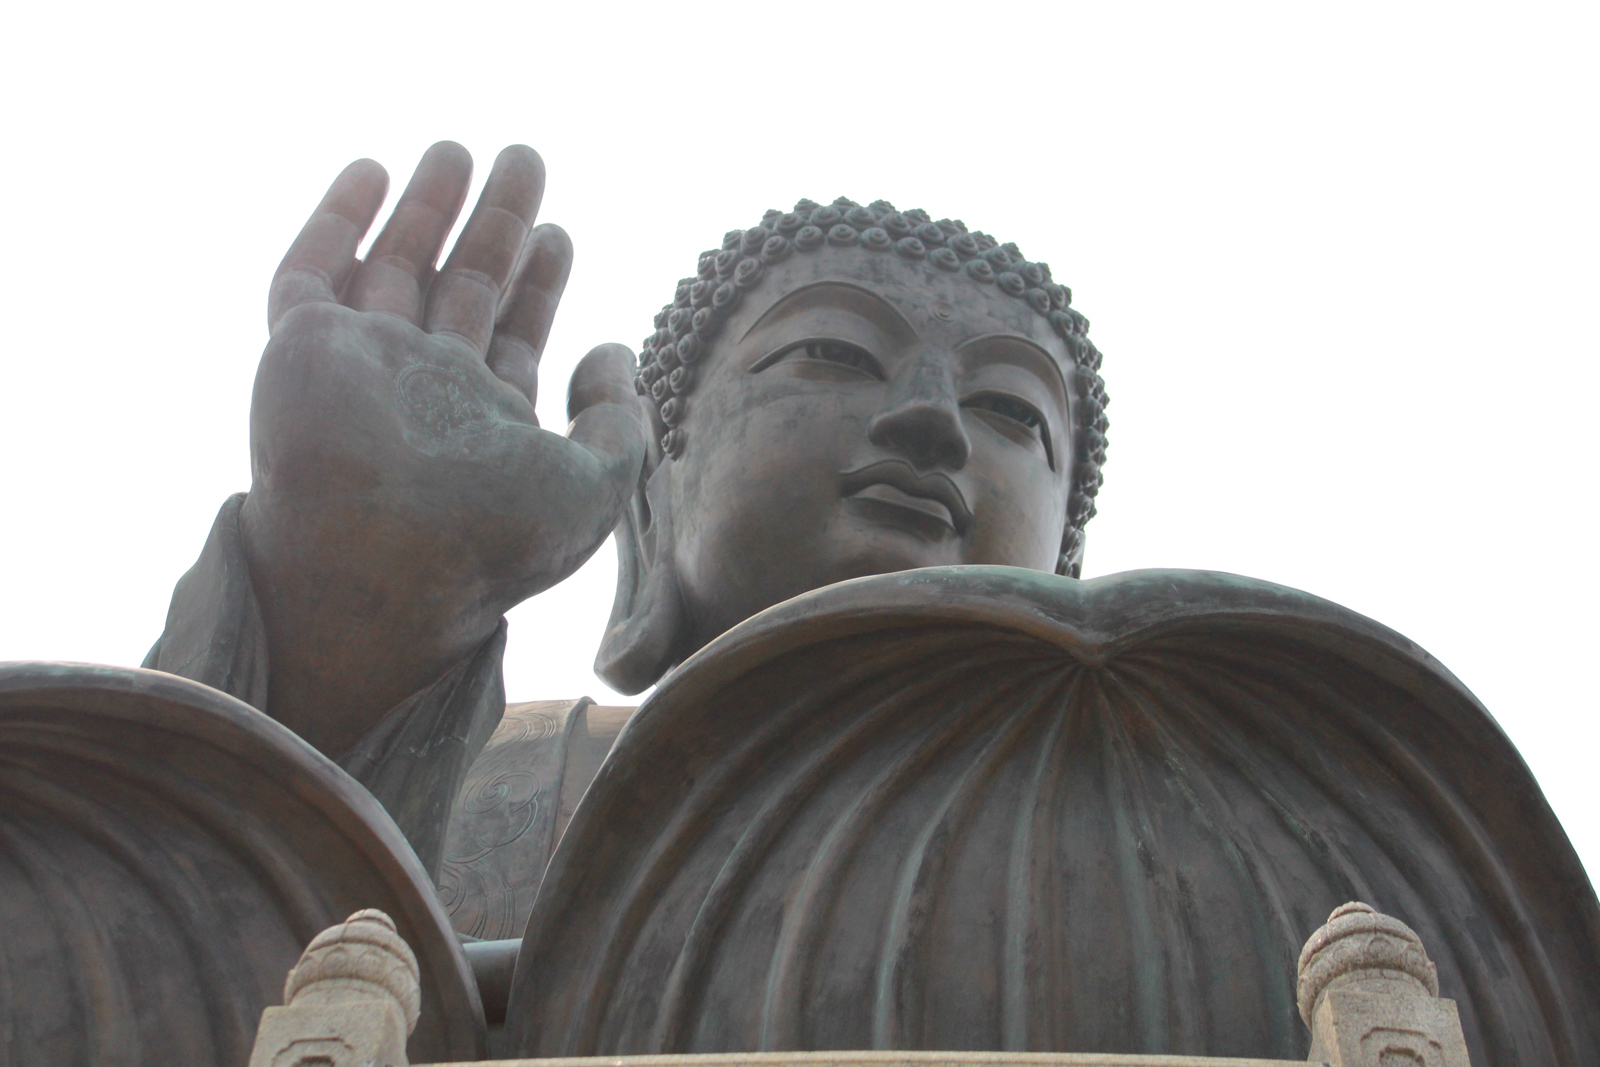 A shot of the Buddha from below.